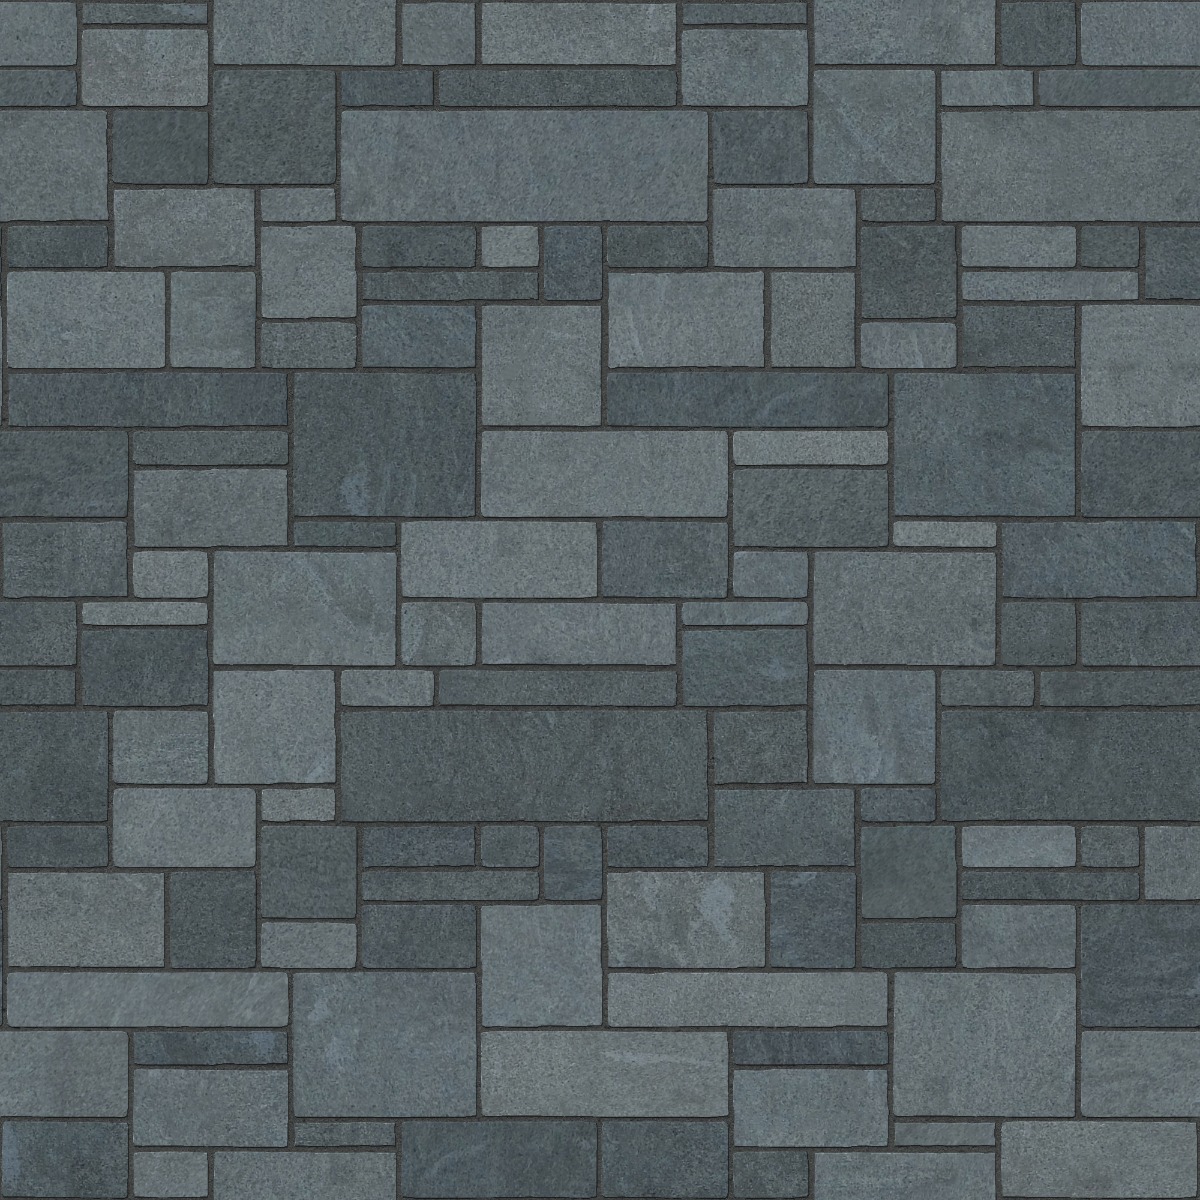 A seamless stone texture with slate blocks arranged in a Uncoursed Ashlar pattern